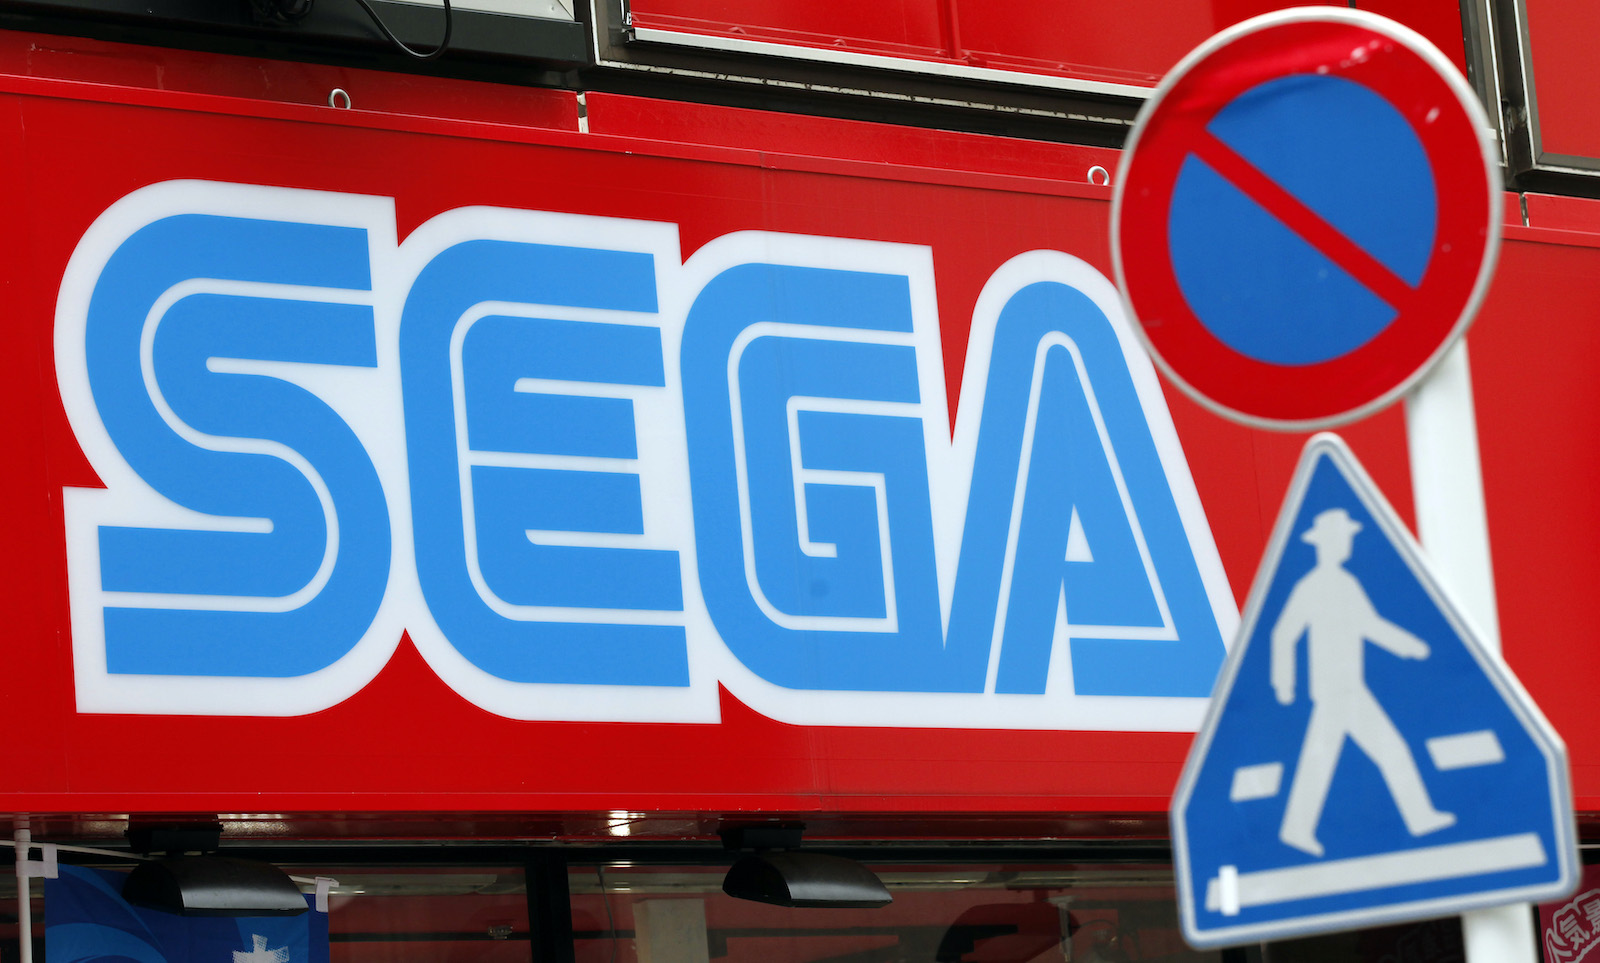 A Sega Corp signboard is seen behind traffic signs at the Akihabara electronic store district in Tokyo June 19, 2011. Japanese video game developer Sega Corp said on Sunday that information belonging to 1.3 million customers has been stolen from its database, the latest in a rash of global cyber attacks against video game companies.     REUTERS/Kim Kyung-Hoon (JAPAN - Tags: CRIME LAW SCI TECH BUSINESS) - GM1E76J1BSN01